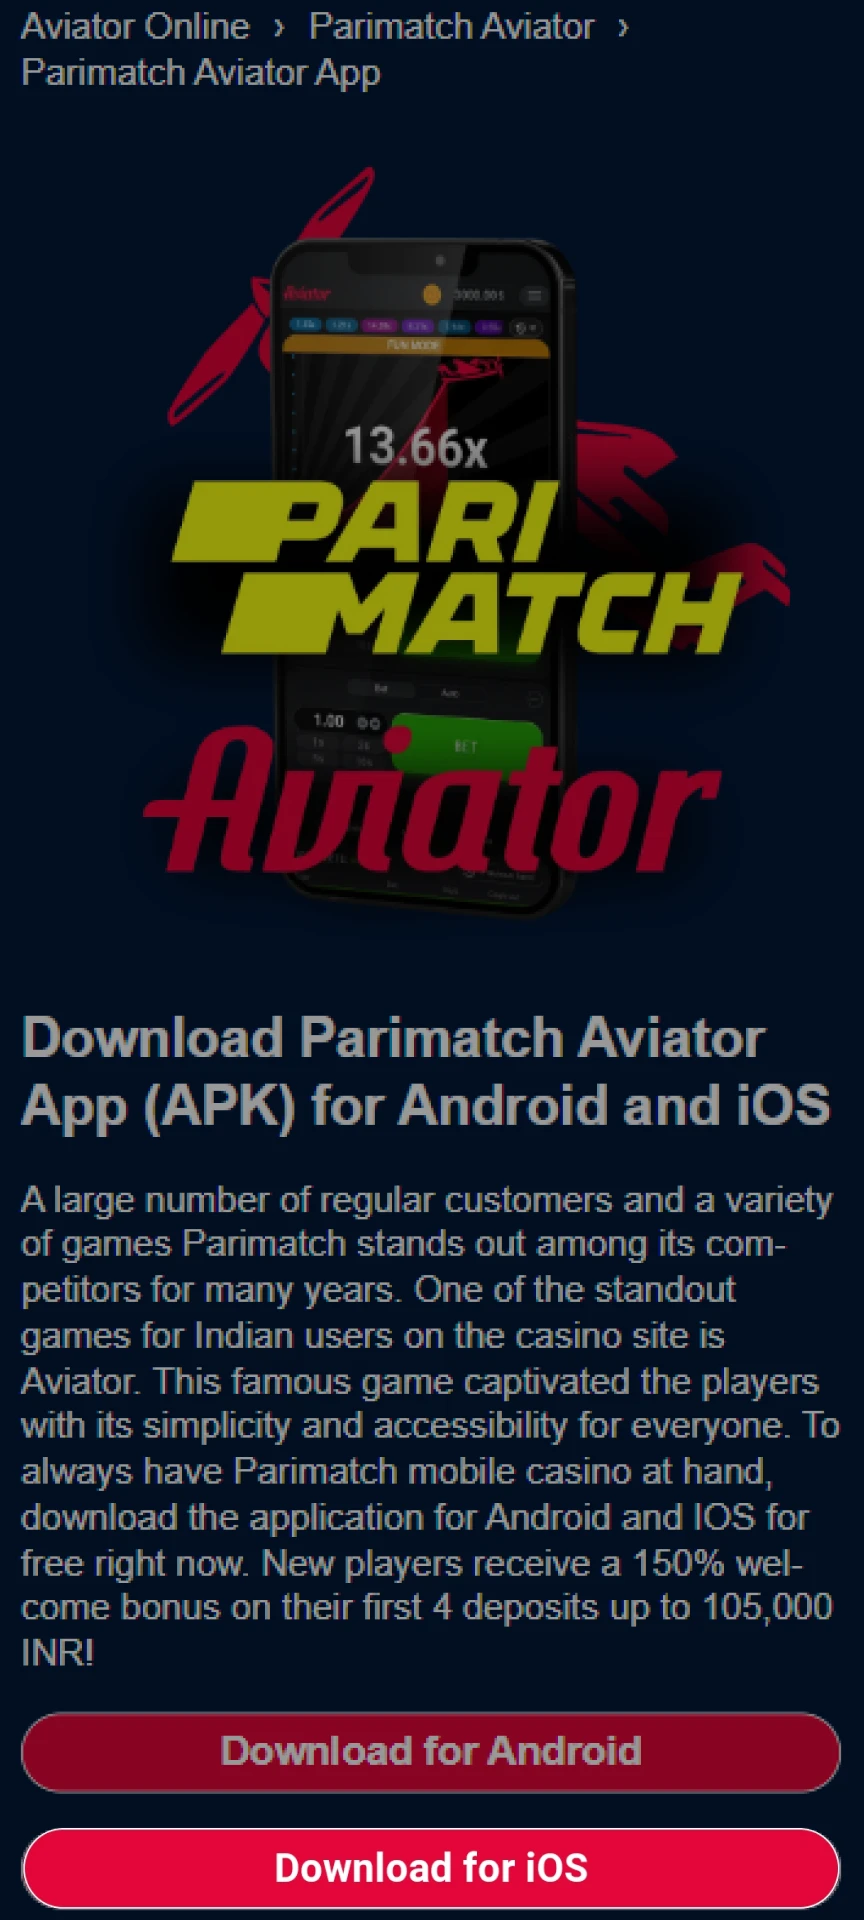 Go to Parimatch to download the application for iOS.